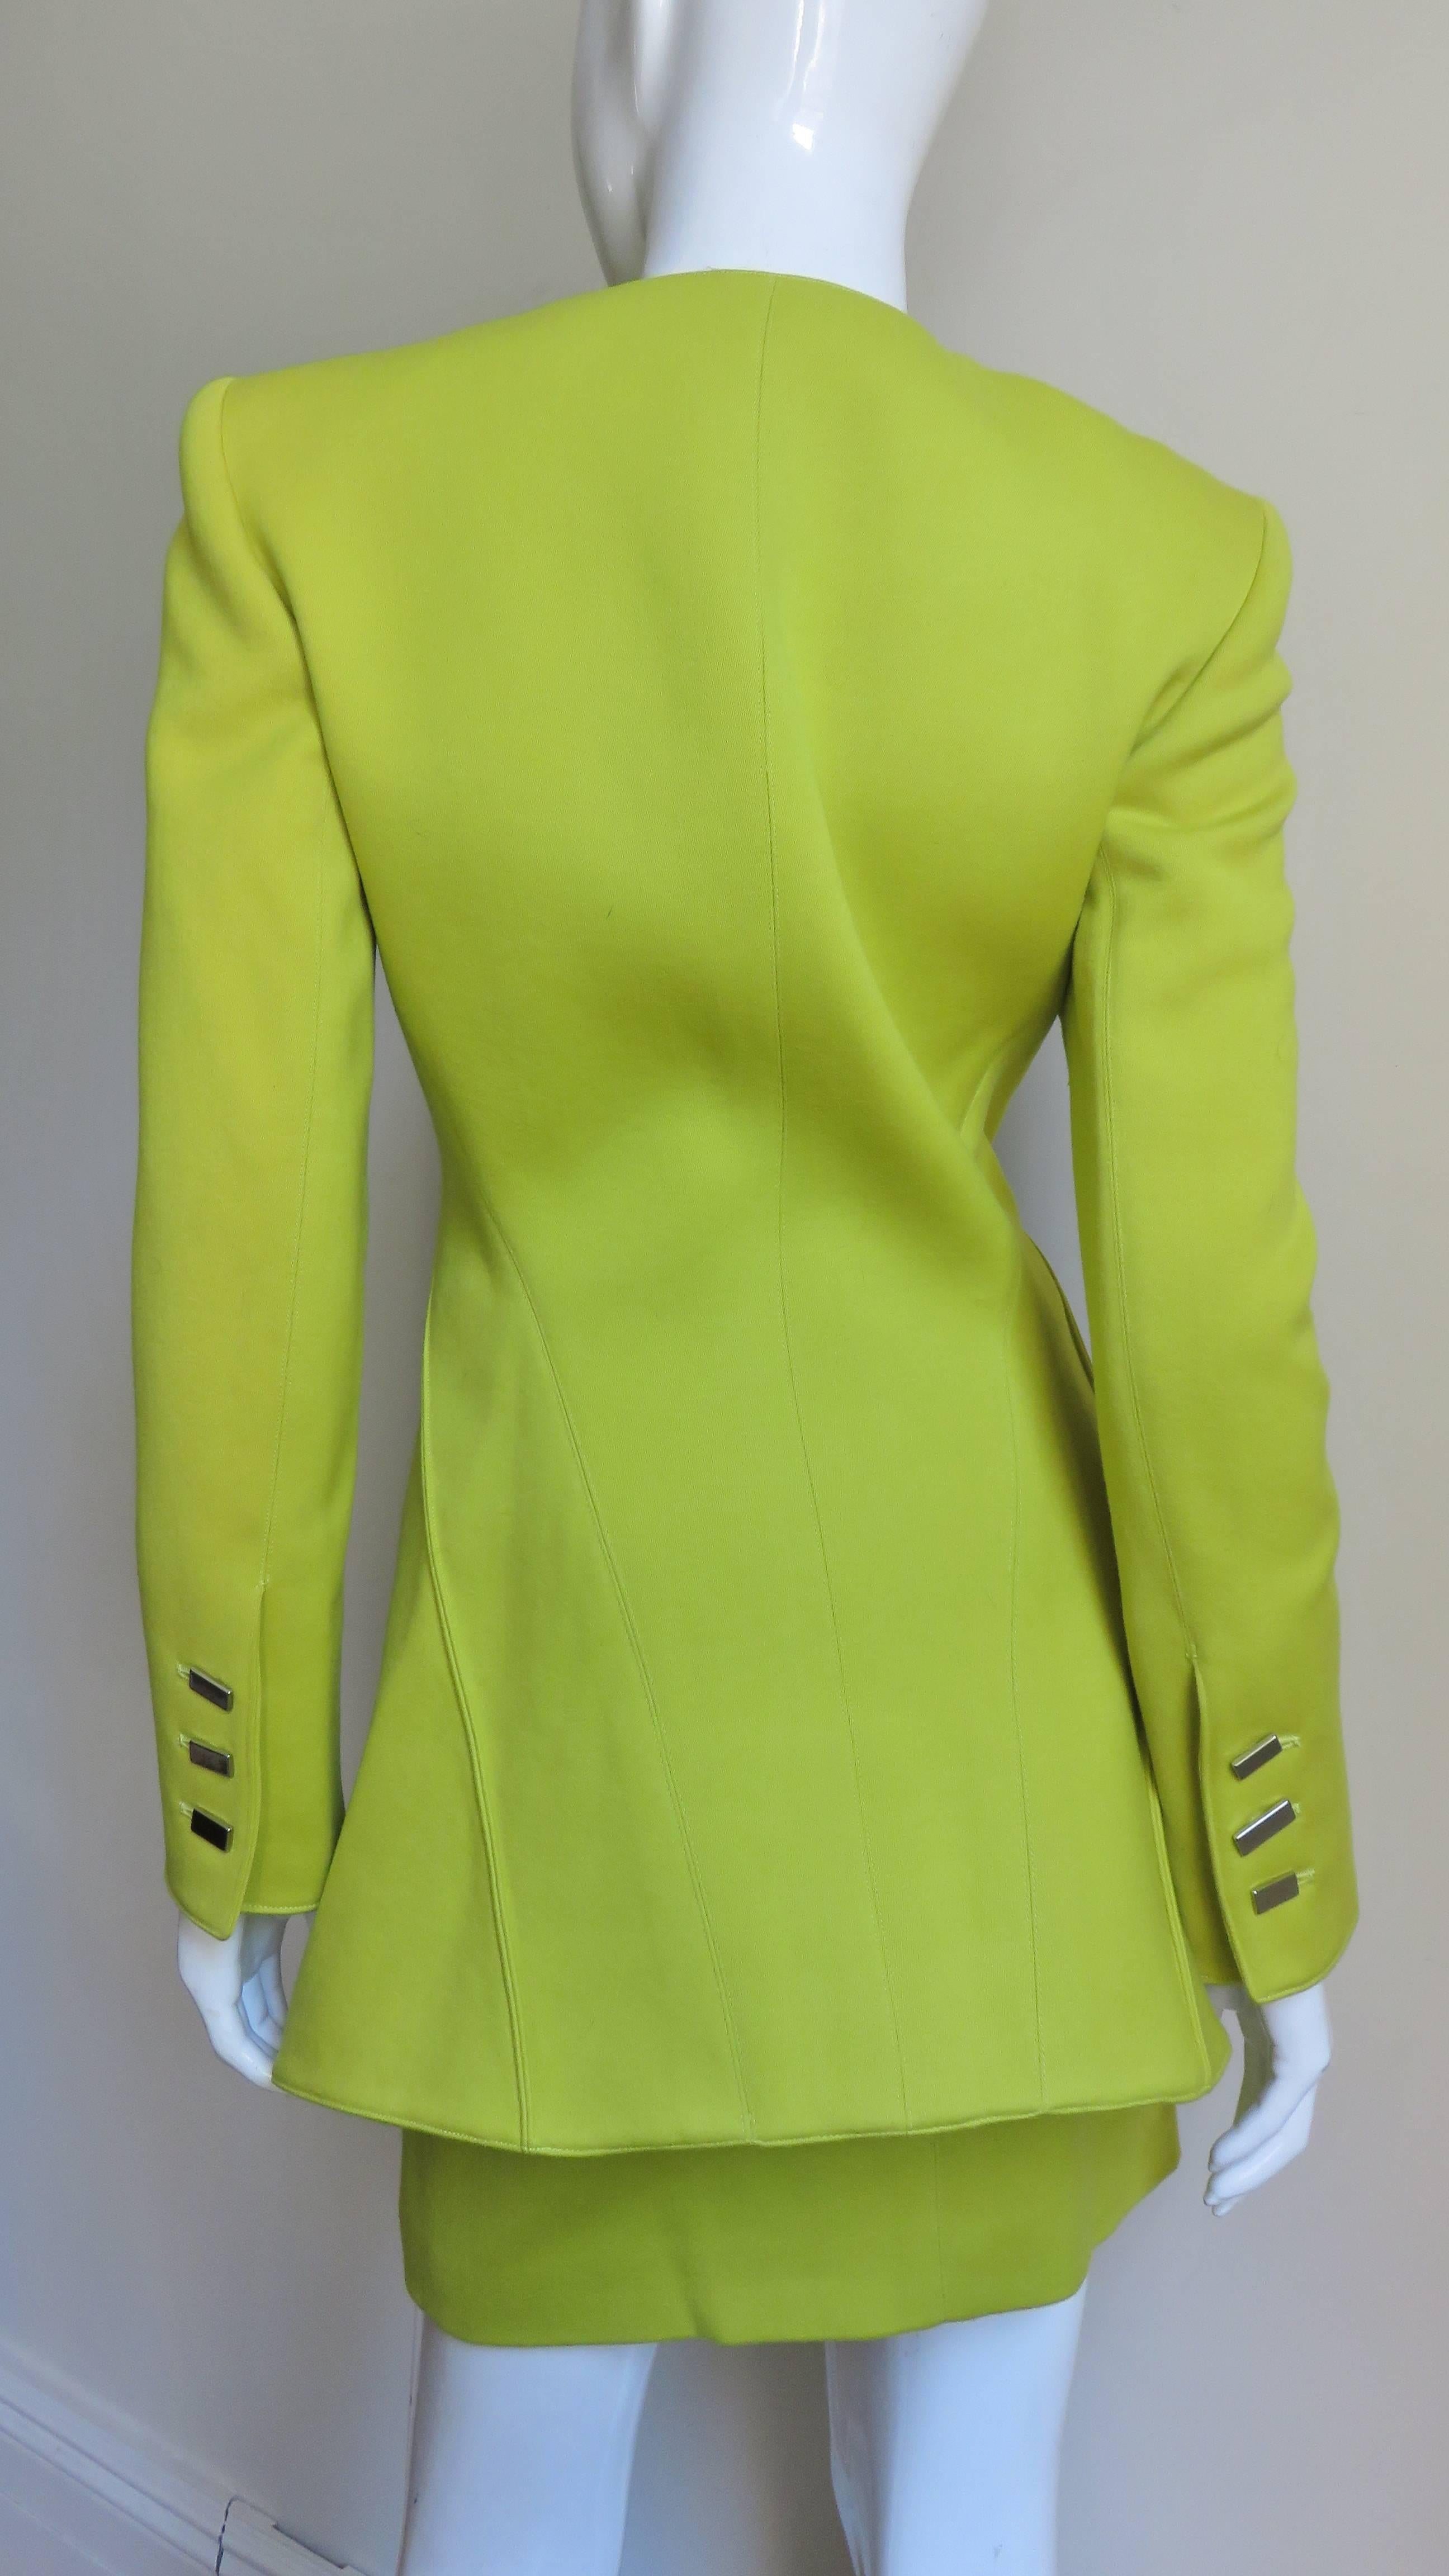  Claude Montana New Neon Futuristic Skirt Suit A/W 1991 For Sale 2